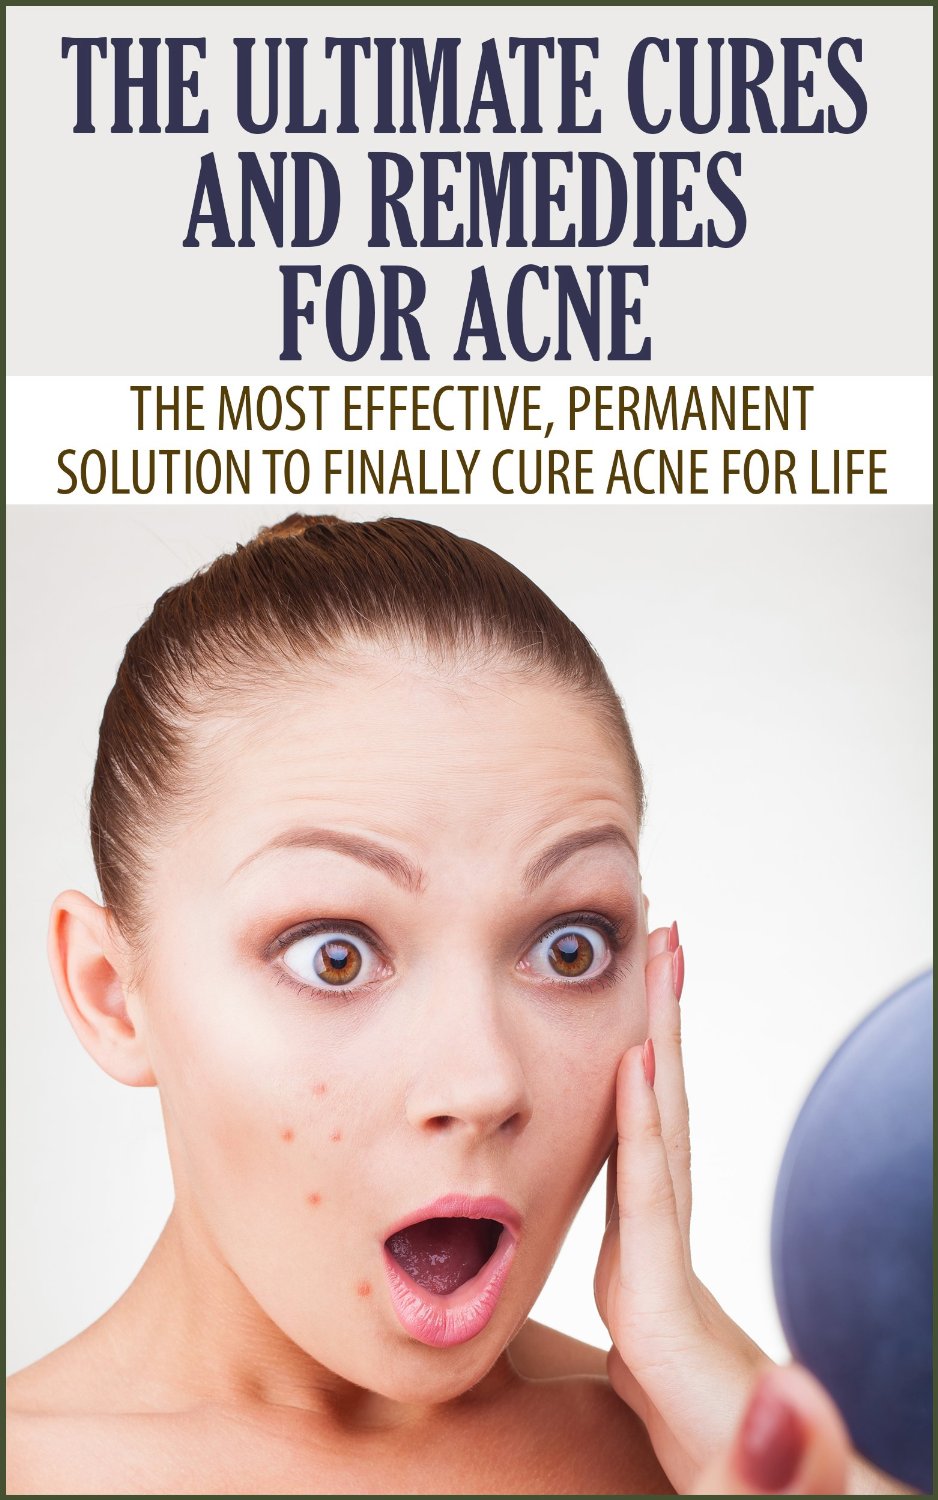 The Ultimate Cures and Remedies For Acne: The Most Effective, Permanent Solution To Finally Cure Acne For Life by Elizabeth Grace